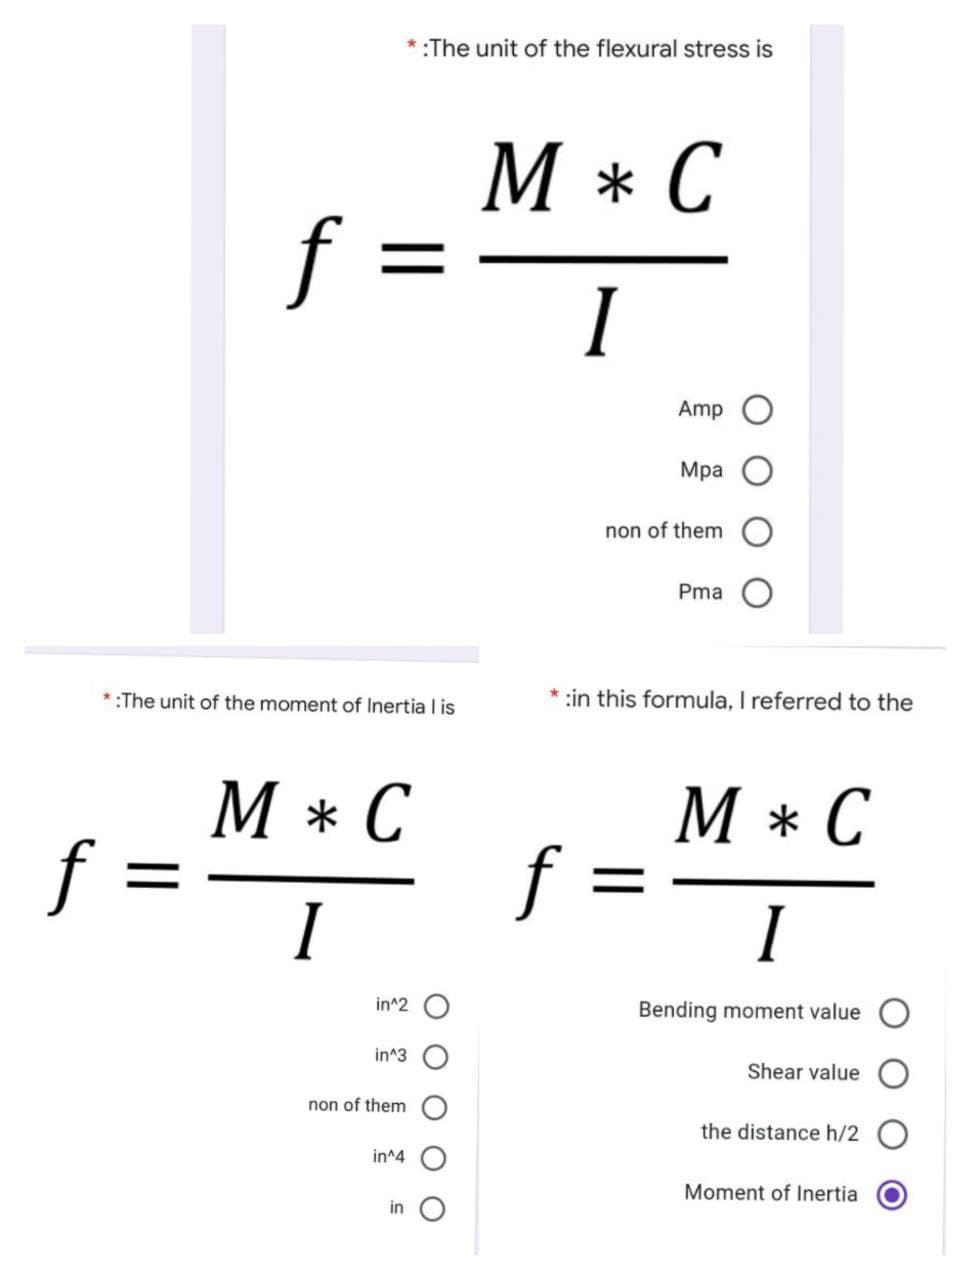 *:The unit of the flexural stress is
M * C
f =
I
Amp
Мра
non of them
Pma
*:The unit of the moment of Inertia I is
:in this formula, I referred to the
М*С
C
М*С
f :
f
I
I
in^2 O
Bending moment value
in^3
Shear value
non of them
the distance h/2 O
in^4
Moment of lInertia
in
